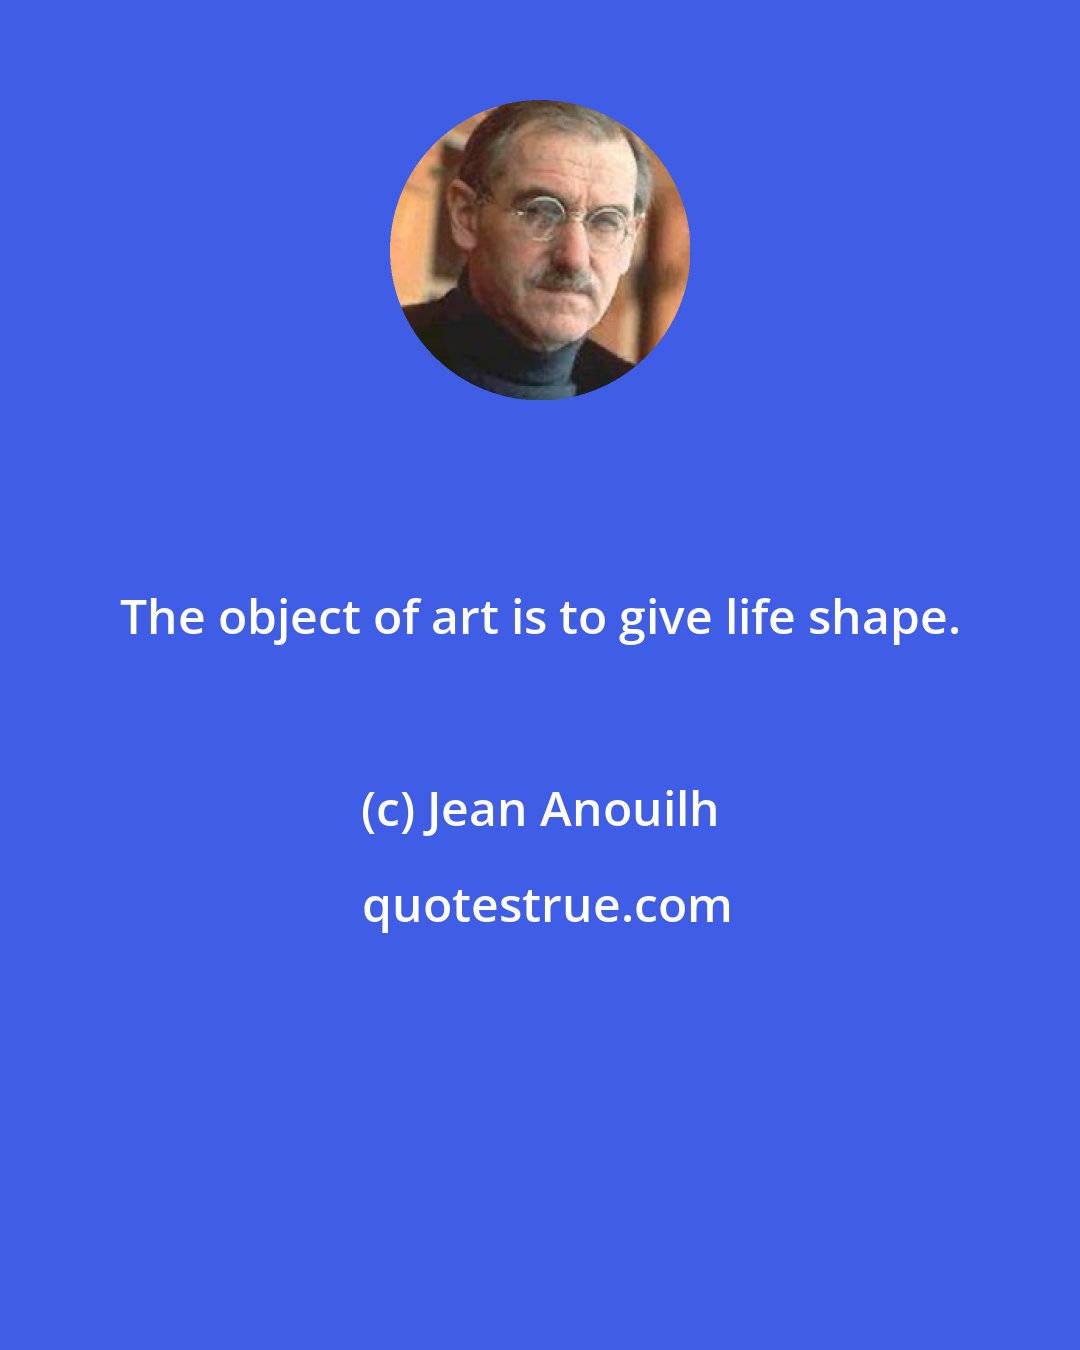 Jean Anouilh: The object of art is to give life shape.